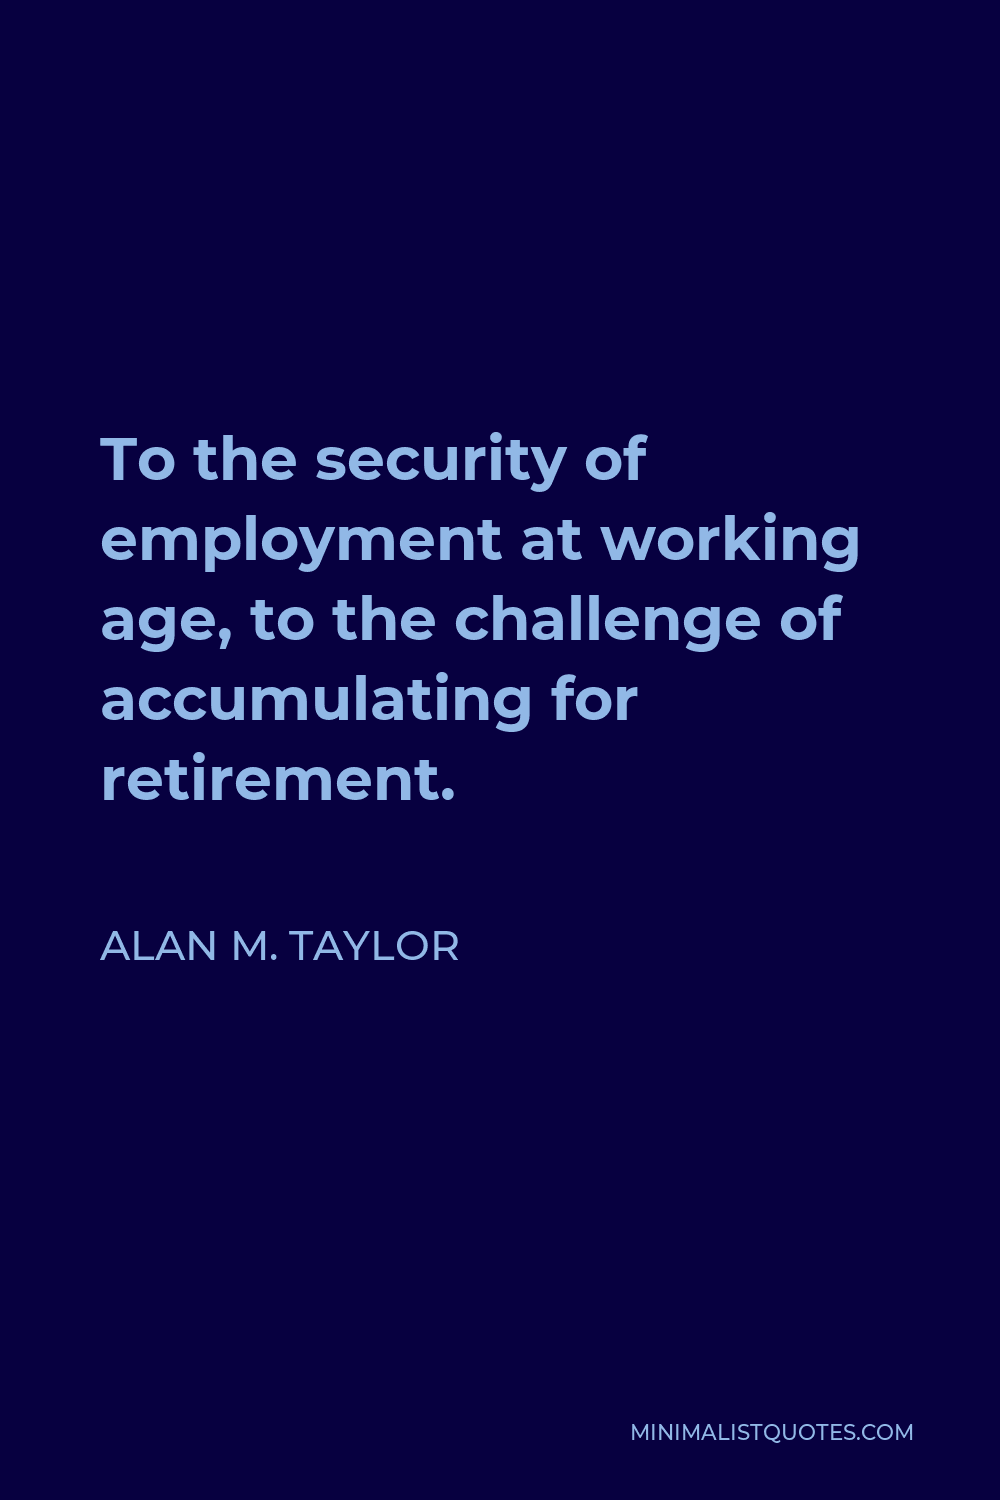 Alan M. Taylor Quote - To the security of employment at working age, to the challenge of accumulating for retirement.